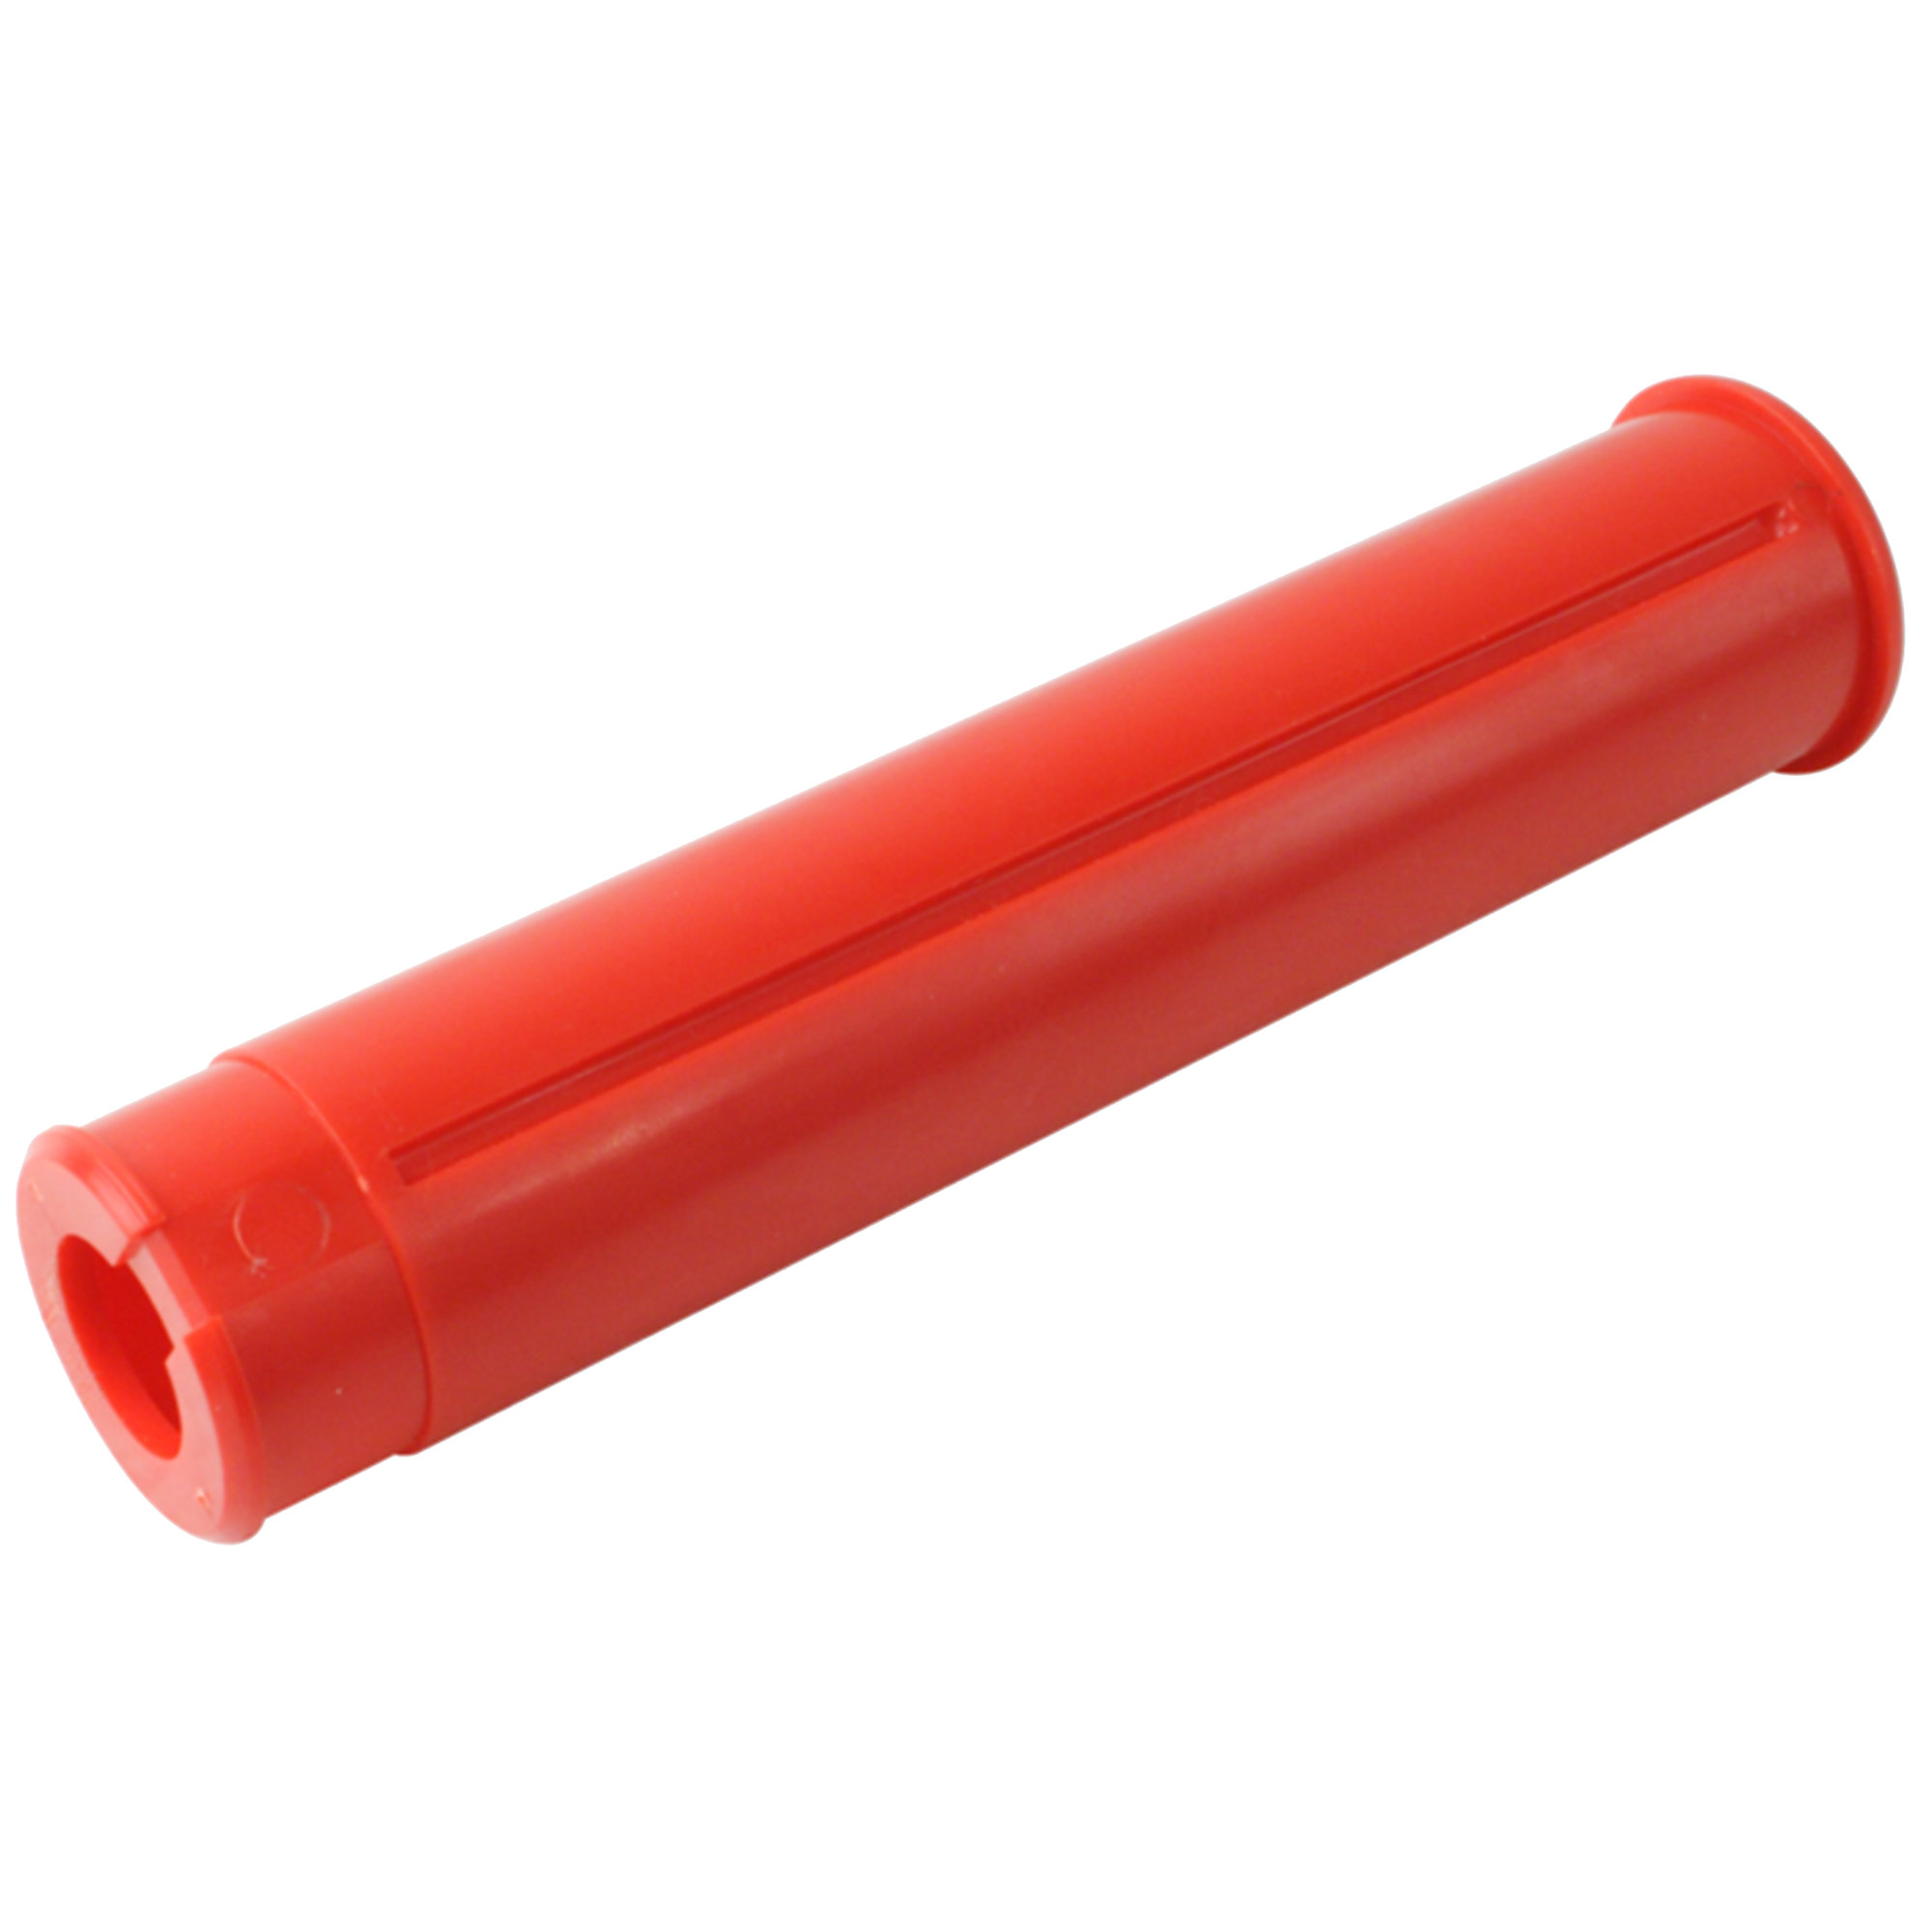 Red Plastic Insulator for CardioTouch Grip